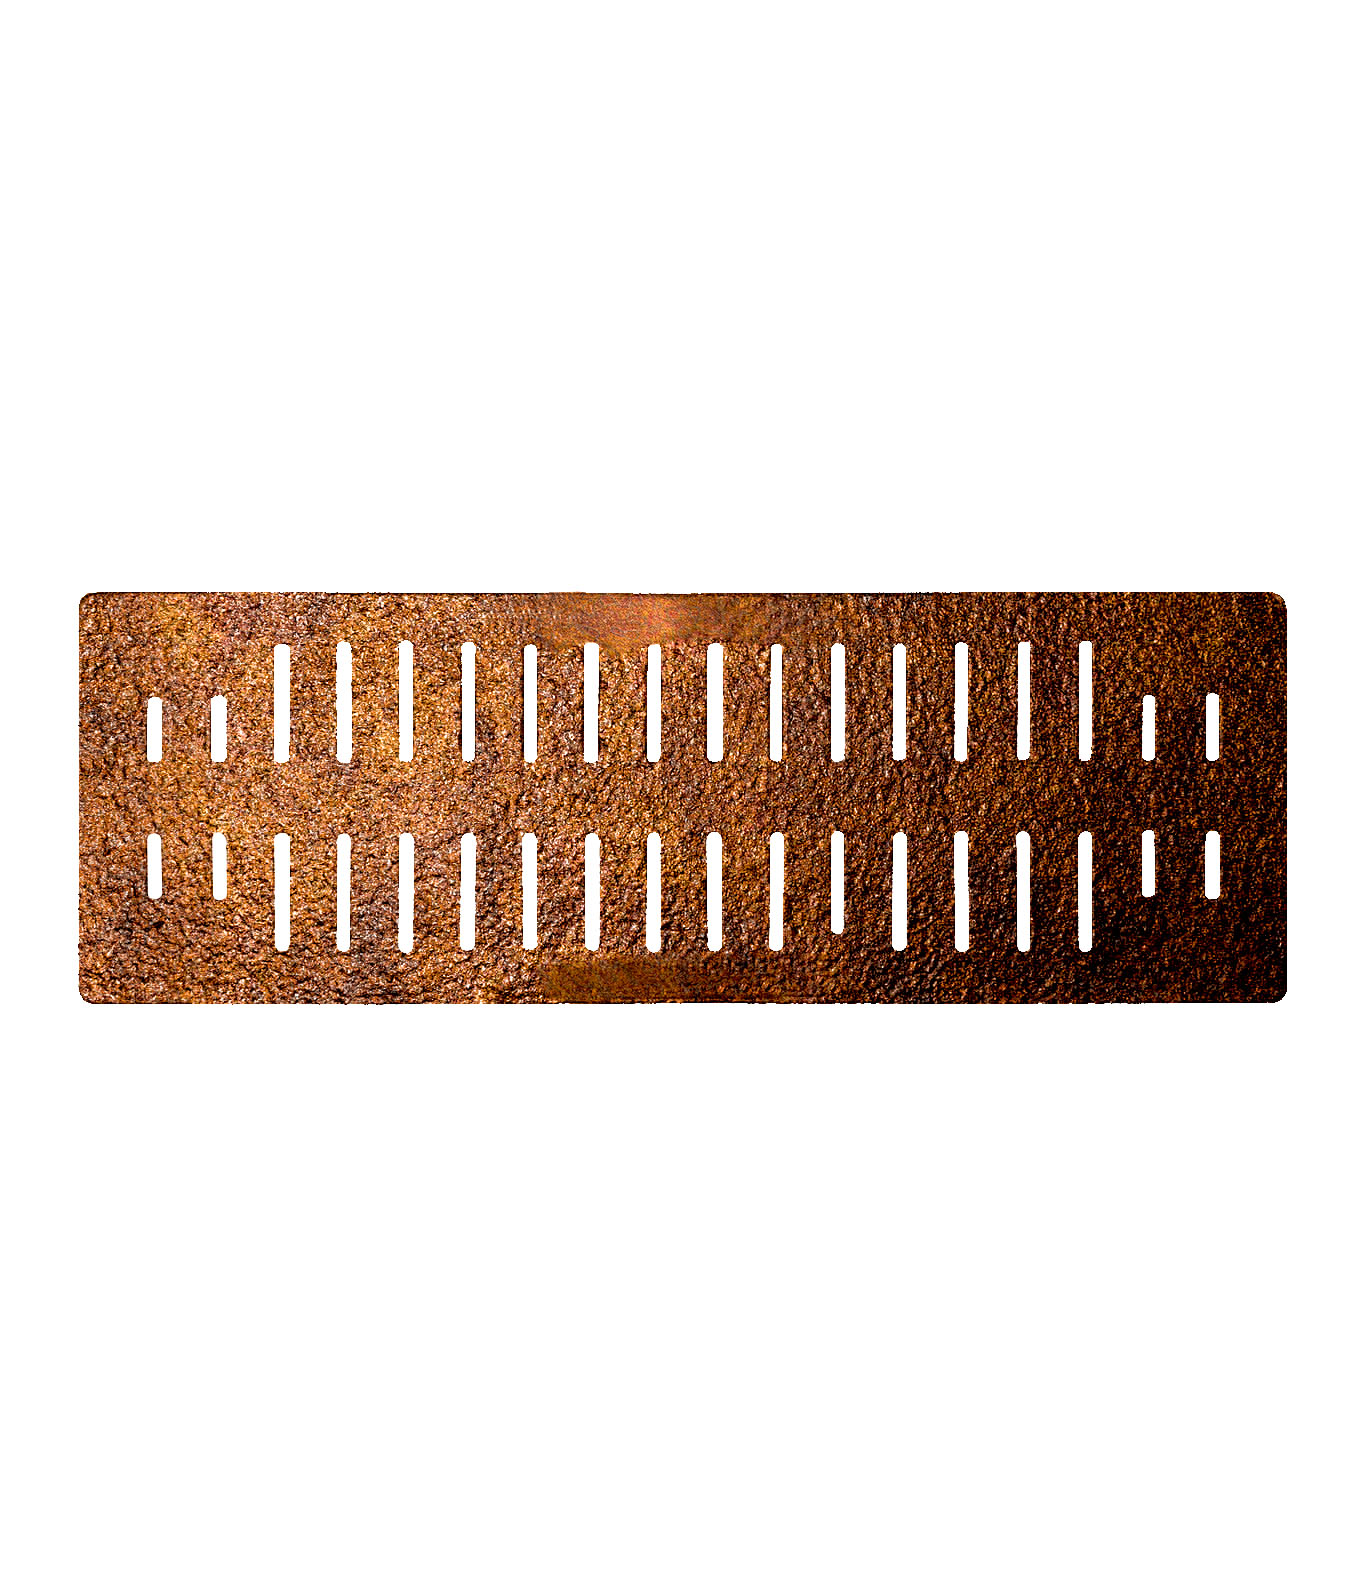 R-4990-AX-P trench drain with 8 inch width